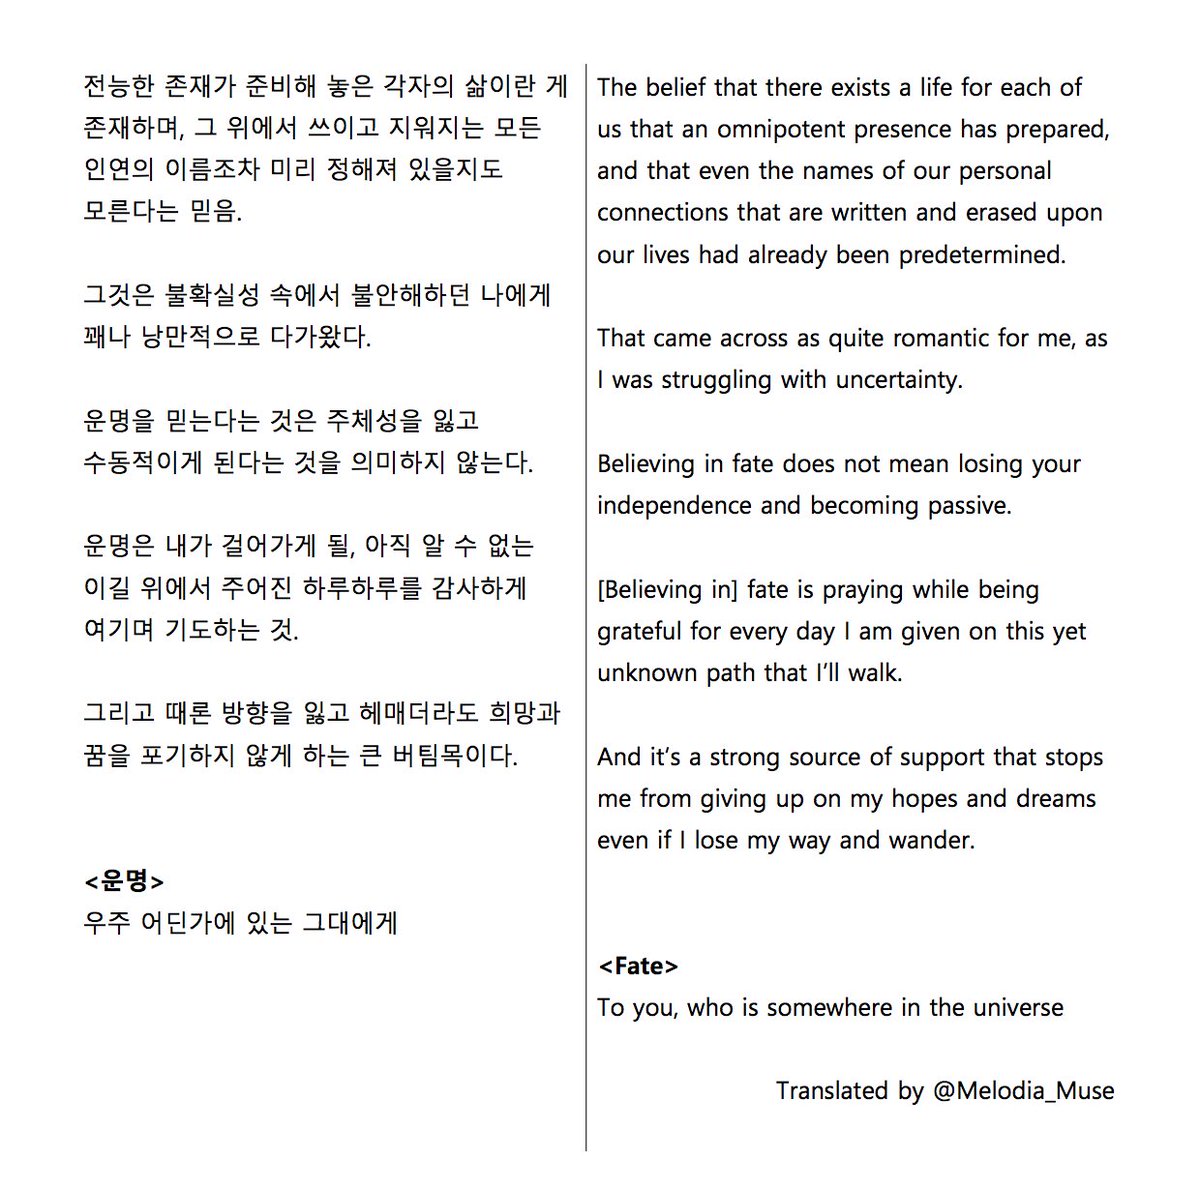 [Minhyun's Book Club]Passage 18. <Fate> from "To you, who is somewhere in the universe"*Full text of passage in Minhyun's latest IG post  https://twitter.com/Melodia_Muse/status/1090524002836131840